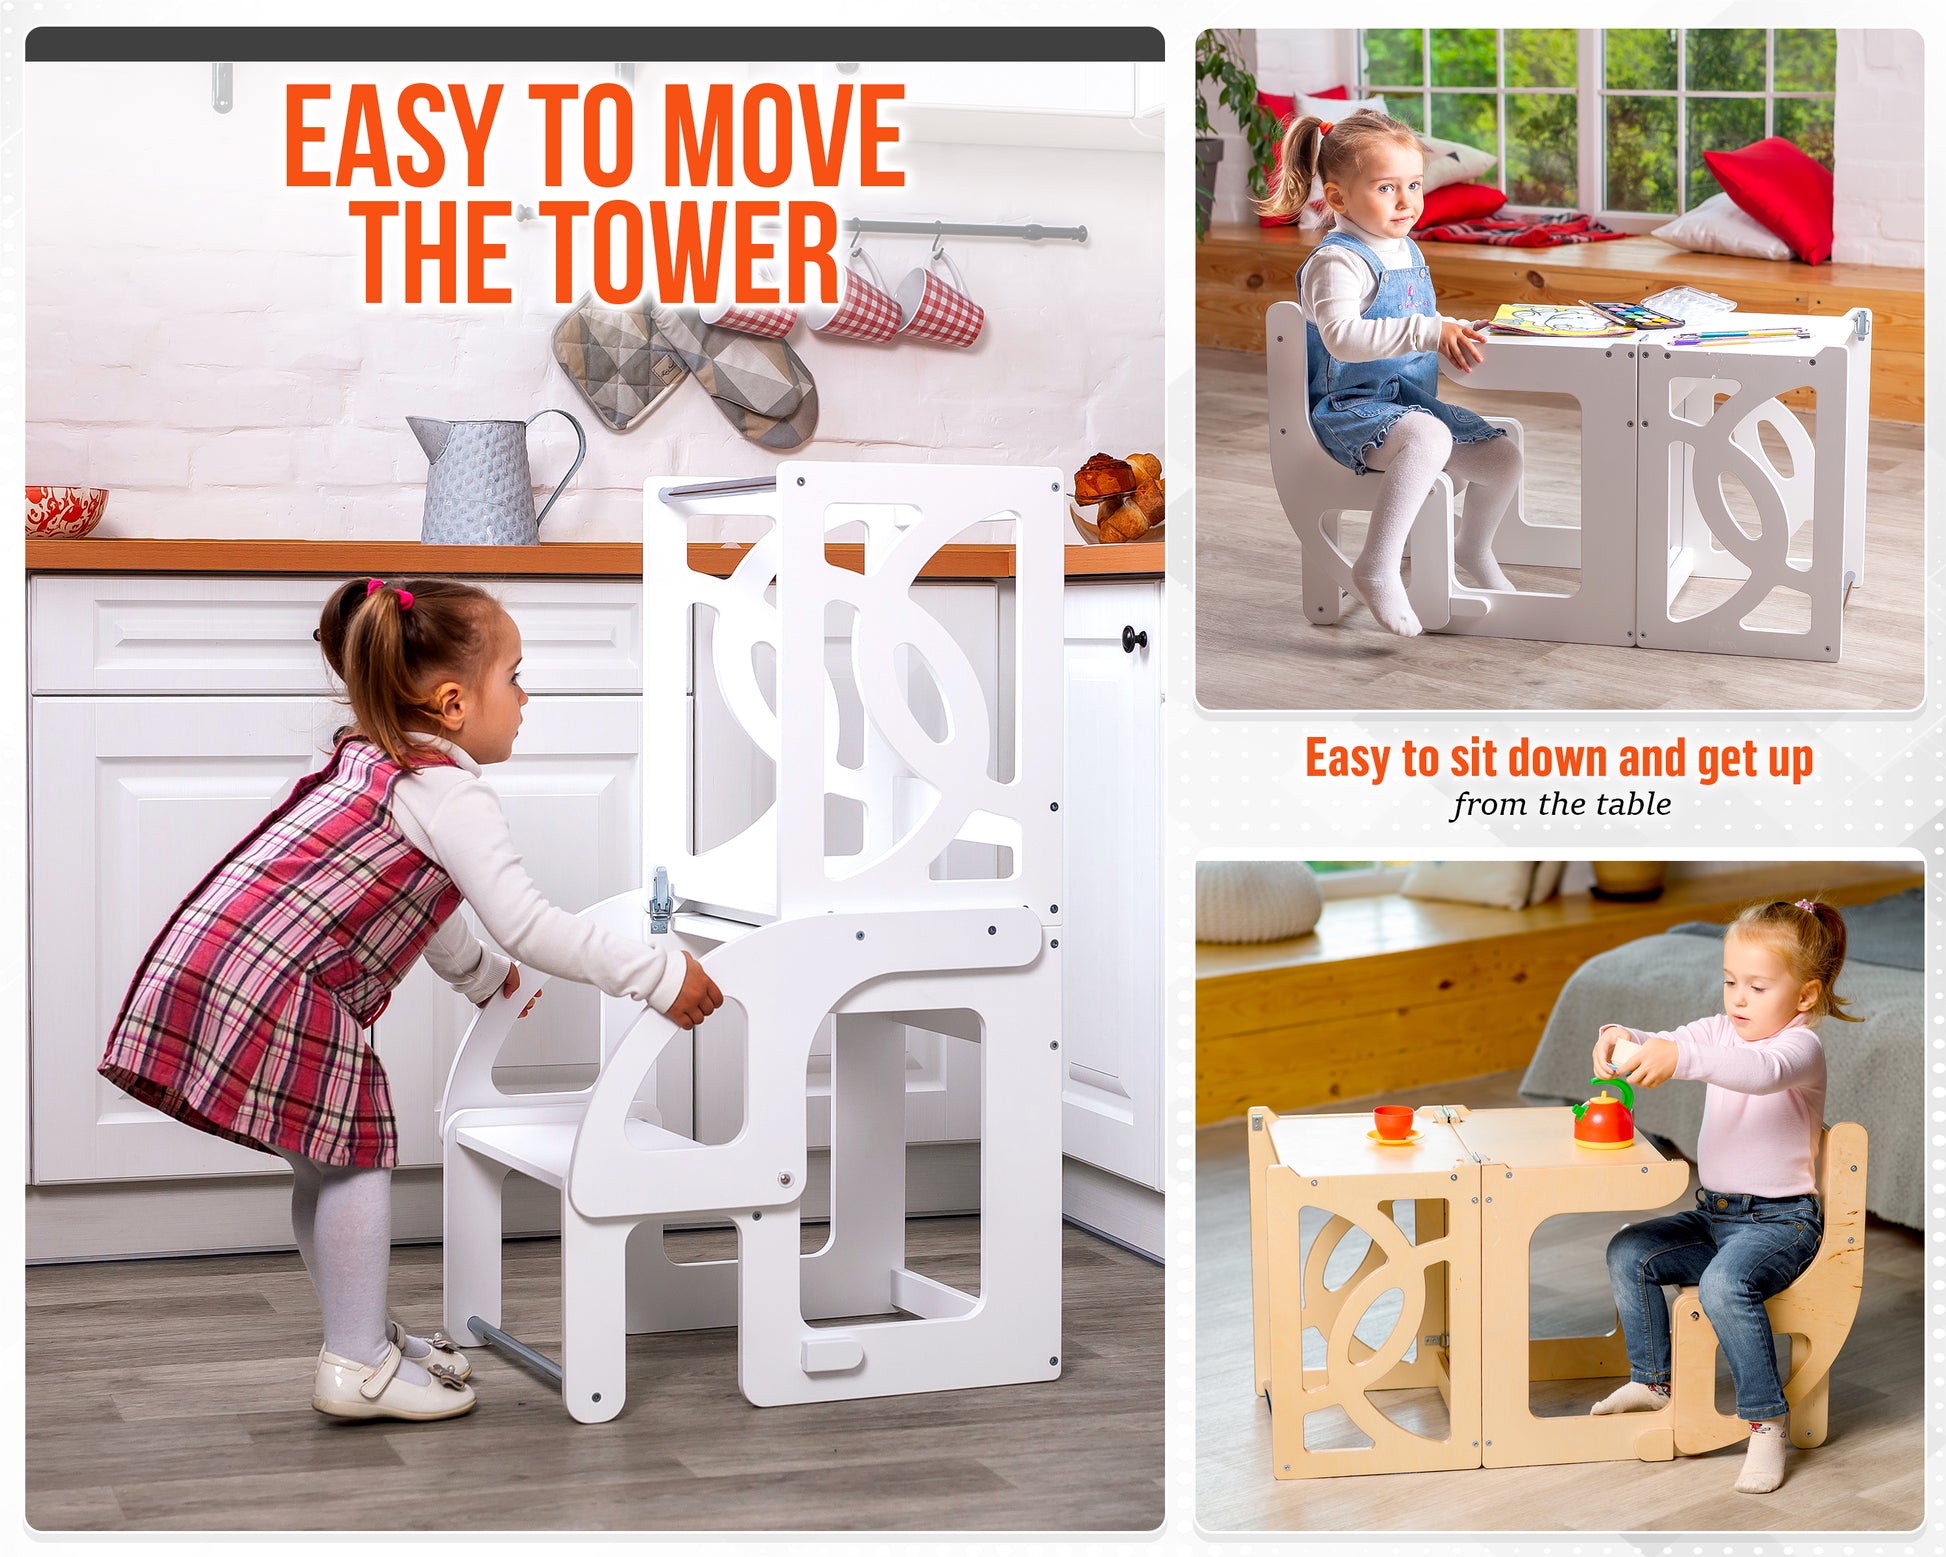 Montessori learning stool Table & Chair, learning toddler tower - Climbambino